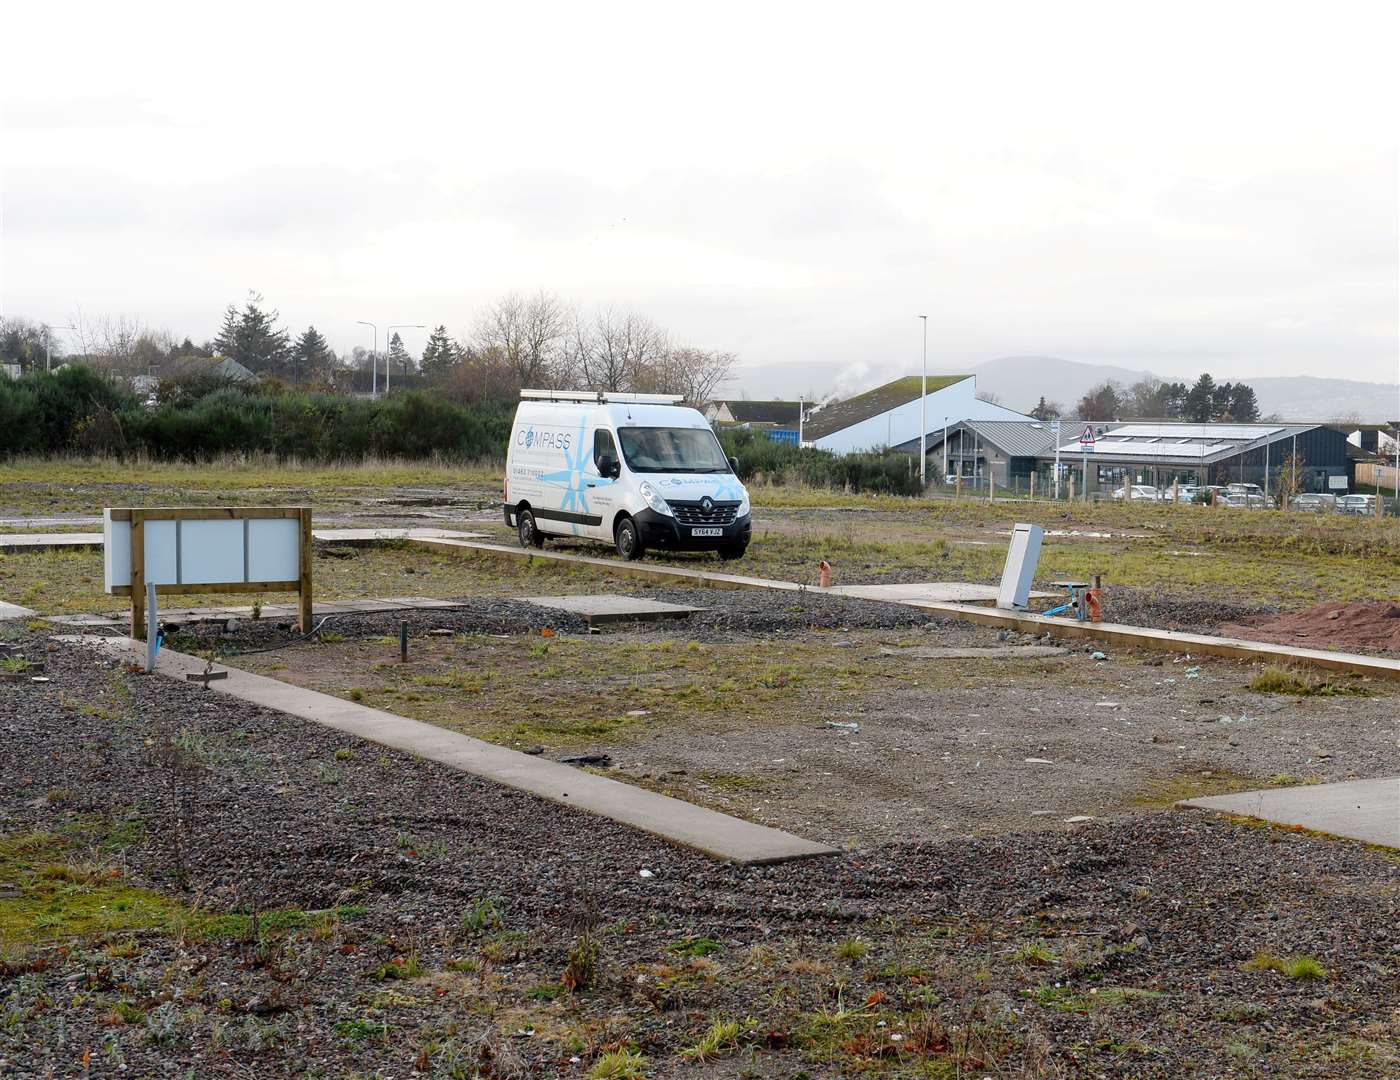 The Haven Center is being built on a site in Smithton previously occupied by the Culloden Court Care Home which was destroyed by fire in 2010.